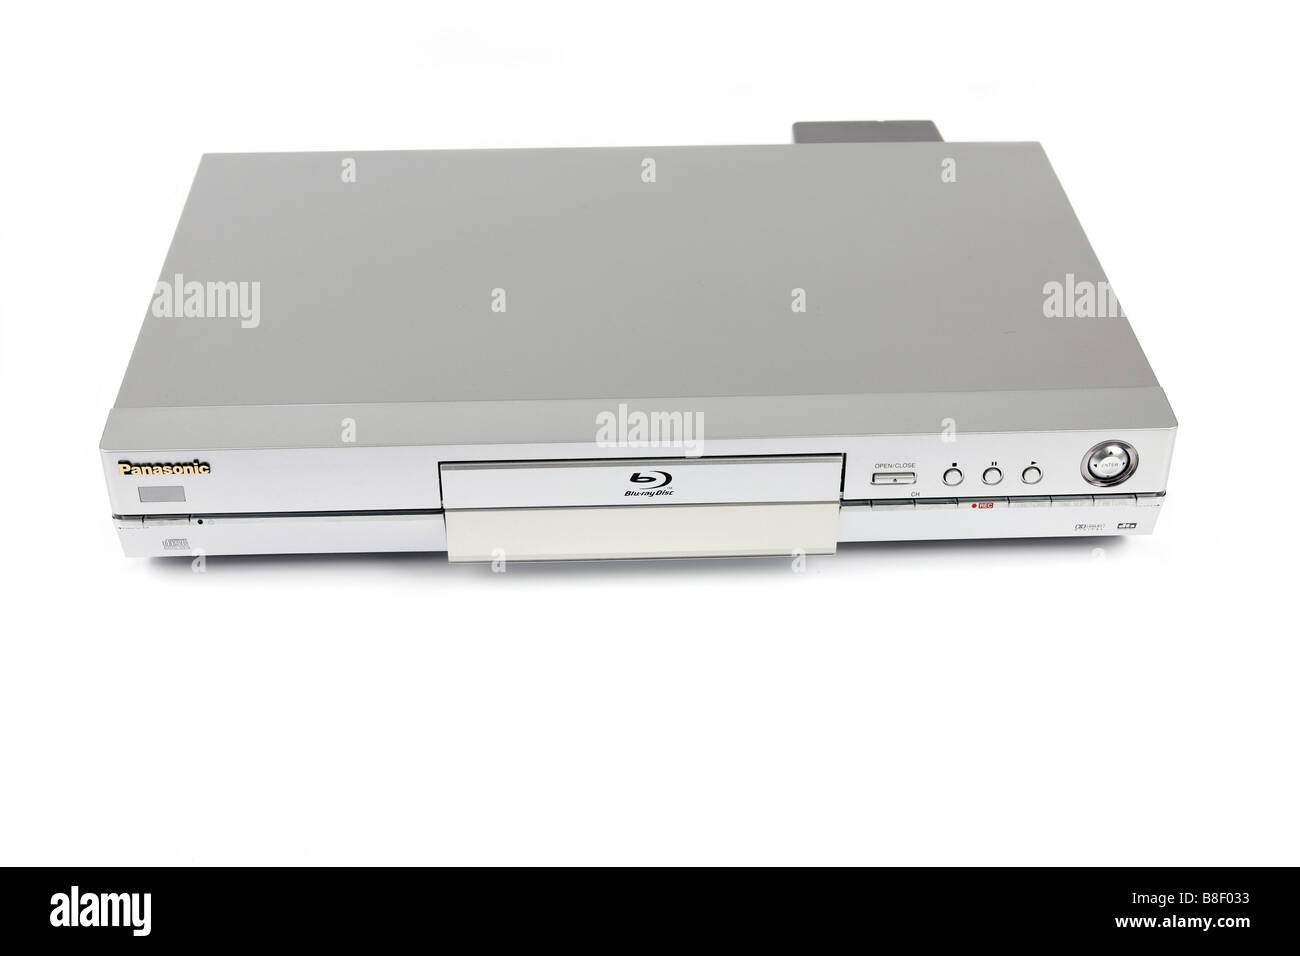 A DVD Blu Ray Digital TV Recorder against a white background Stock Photo